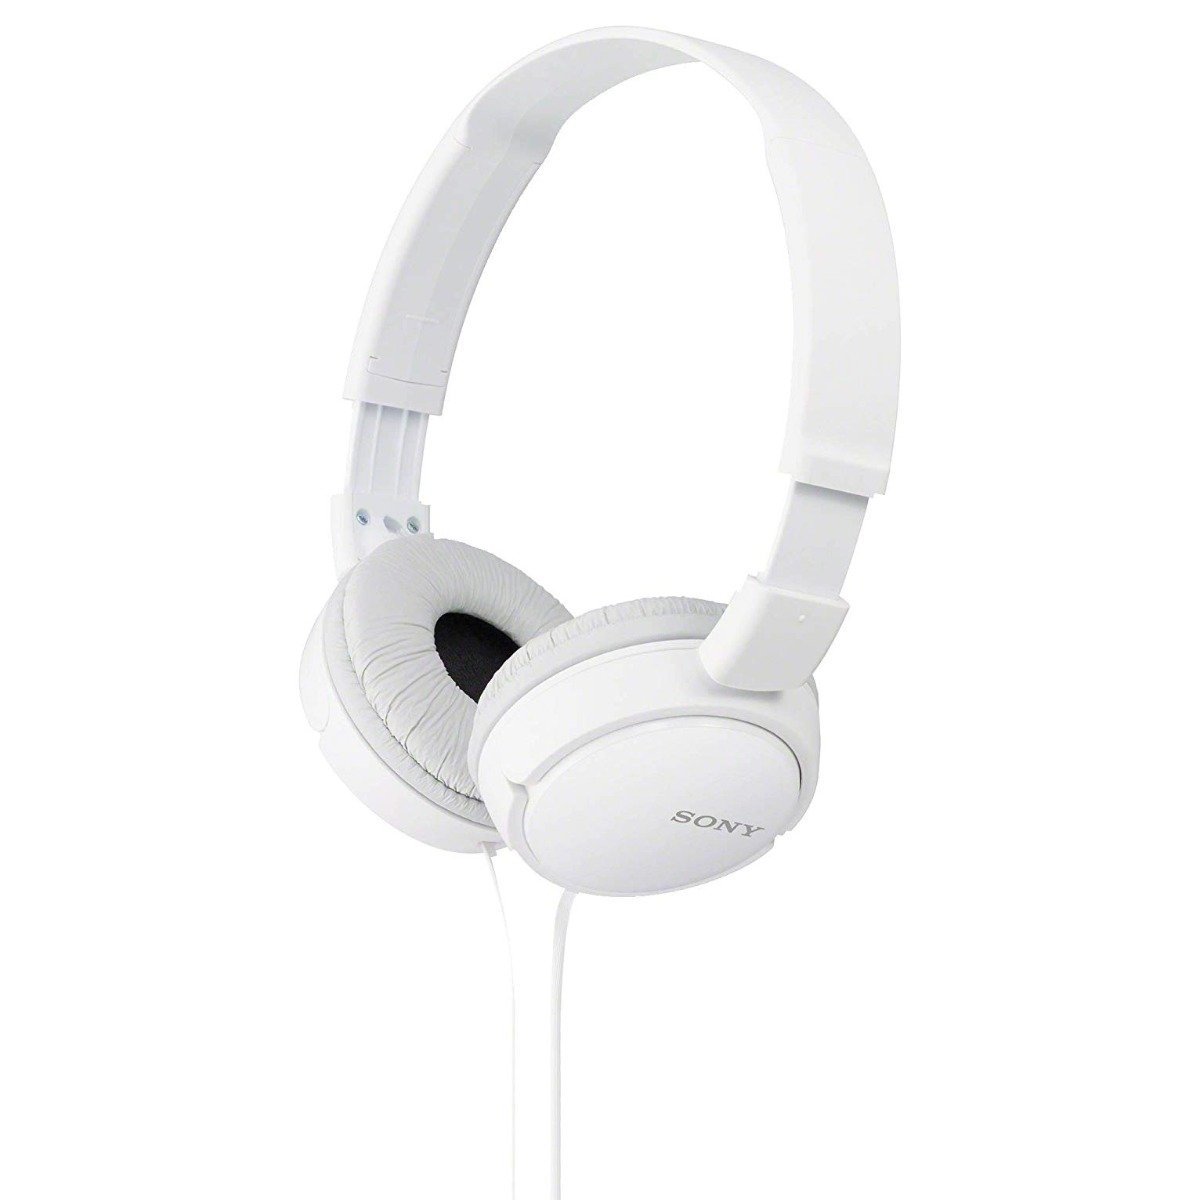 Sony MDRZX110 Stereo Headphones - Assorted Colors / White